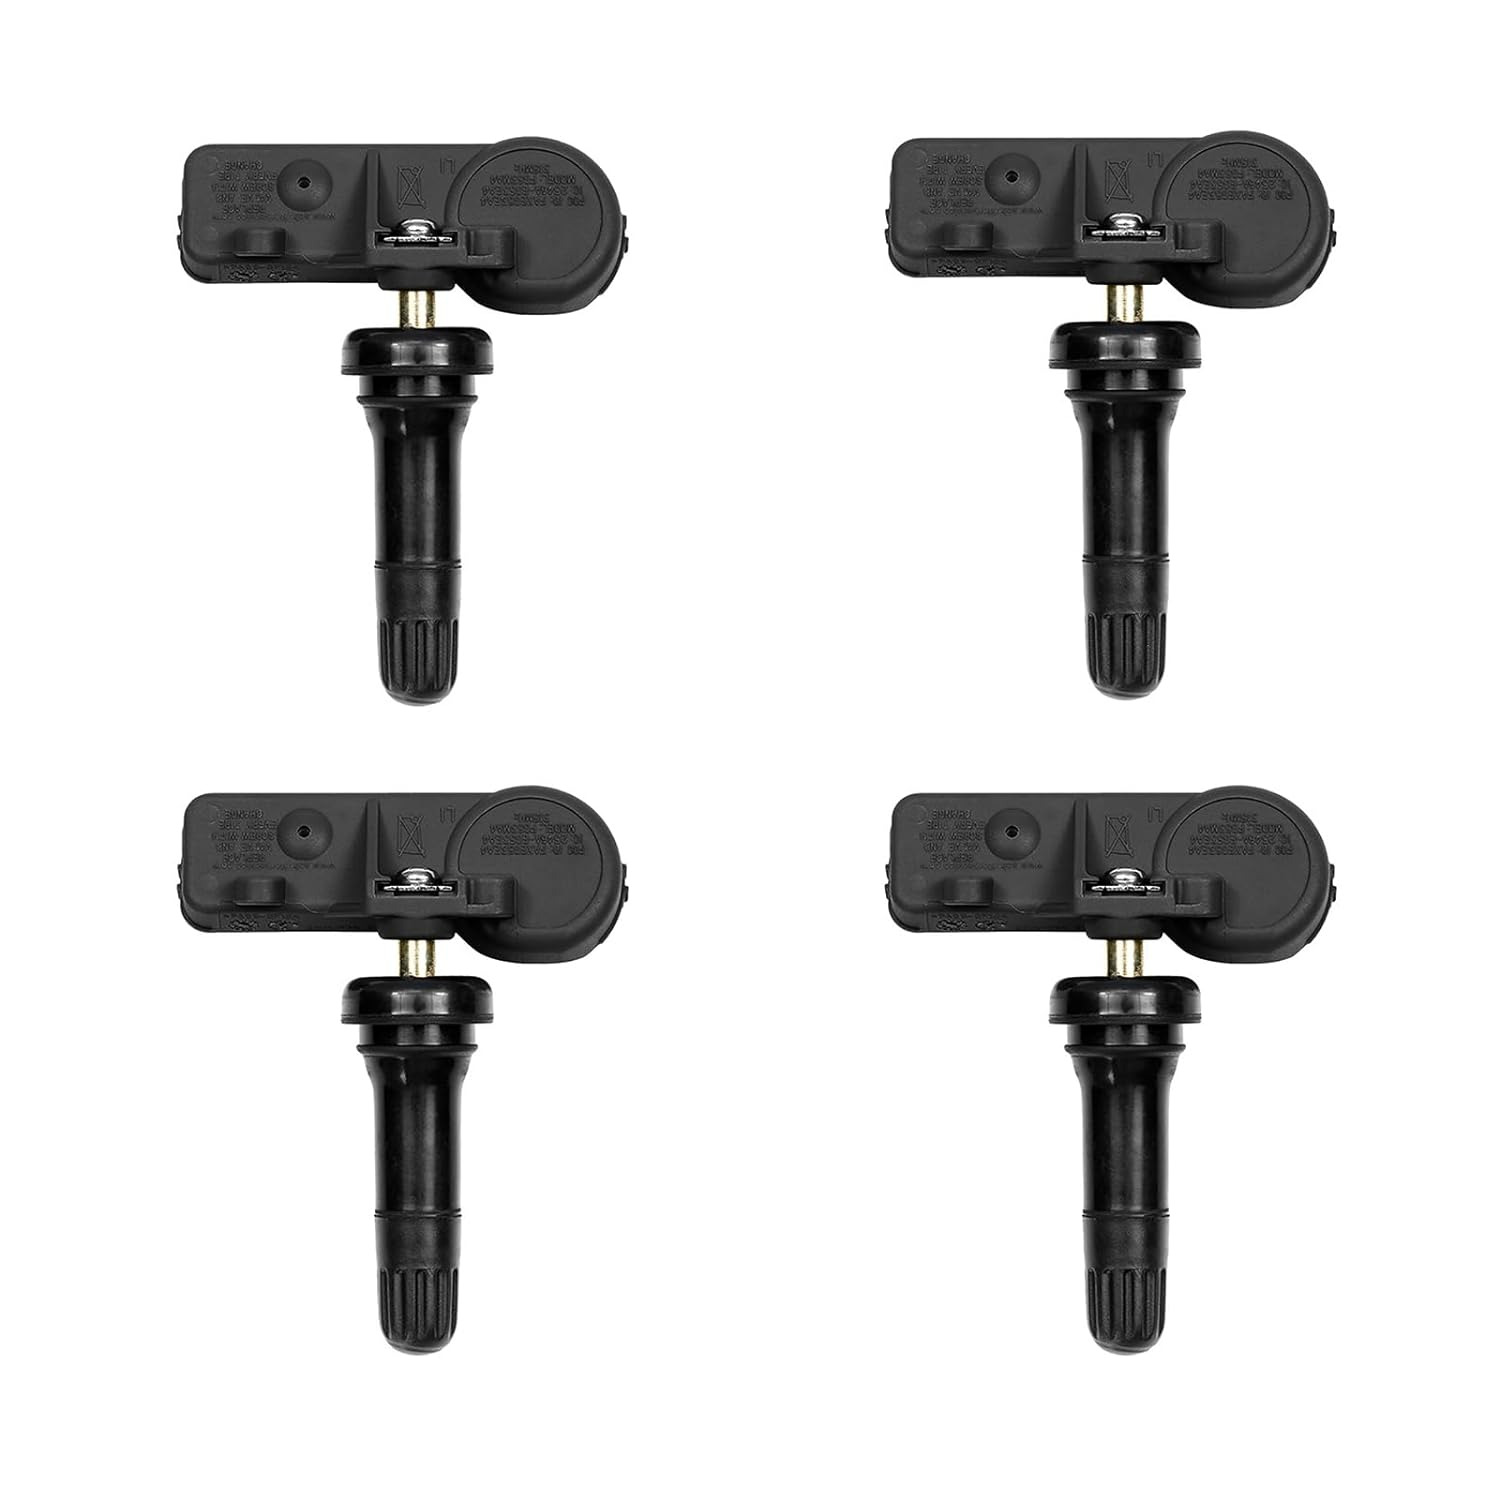 Tire Pressure Sensor 315Mhz TPMS Snap-In 4Pcs Compatible with Chevy GMC Cadillac